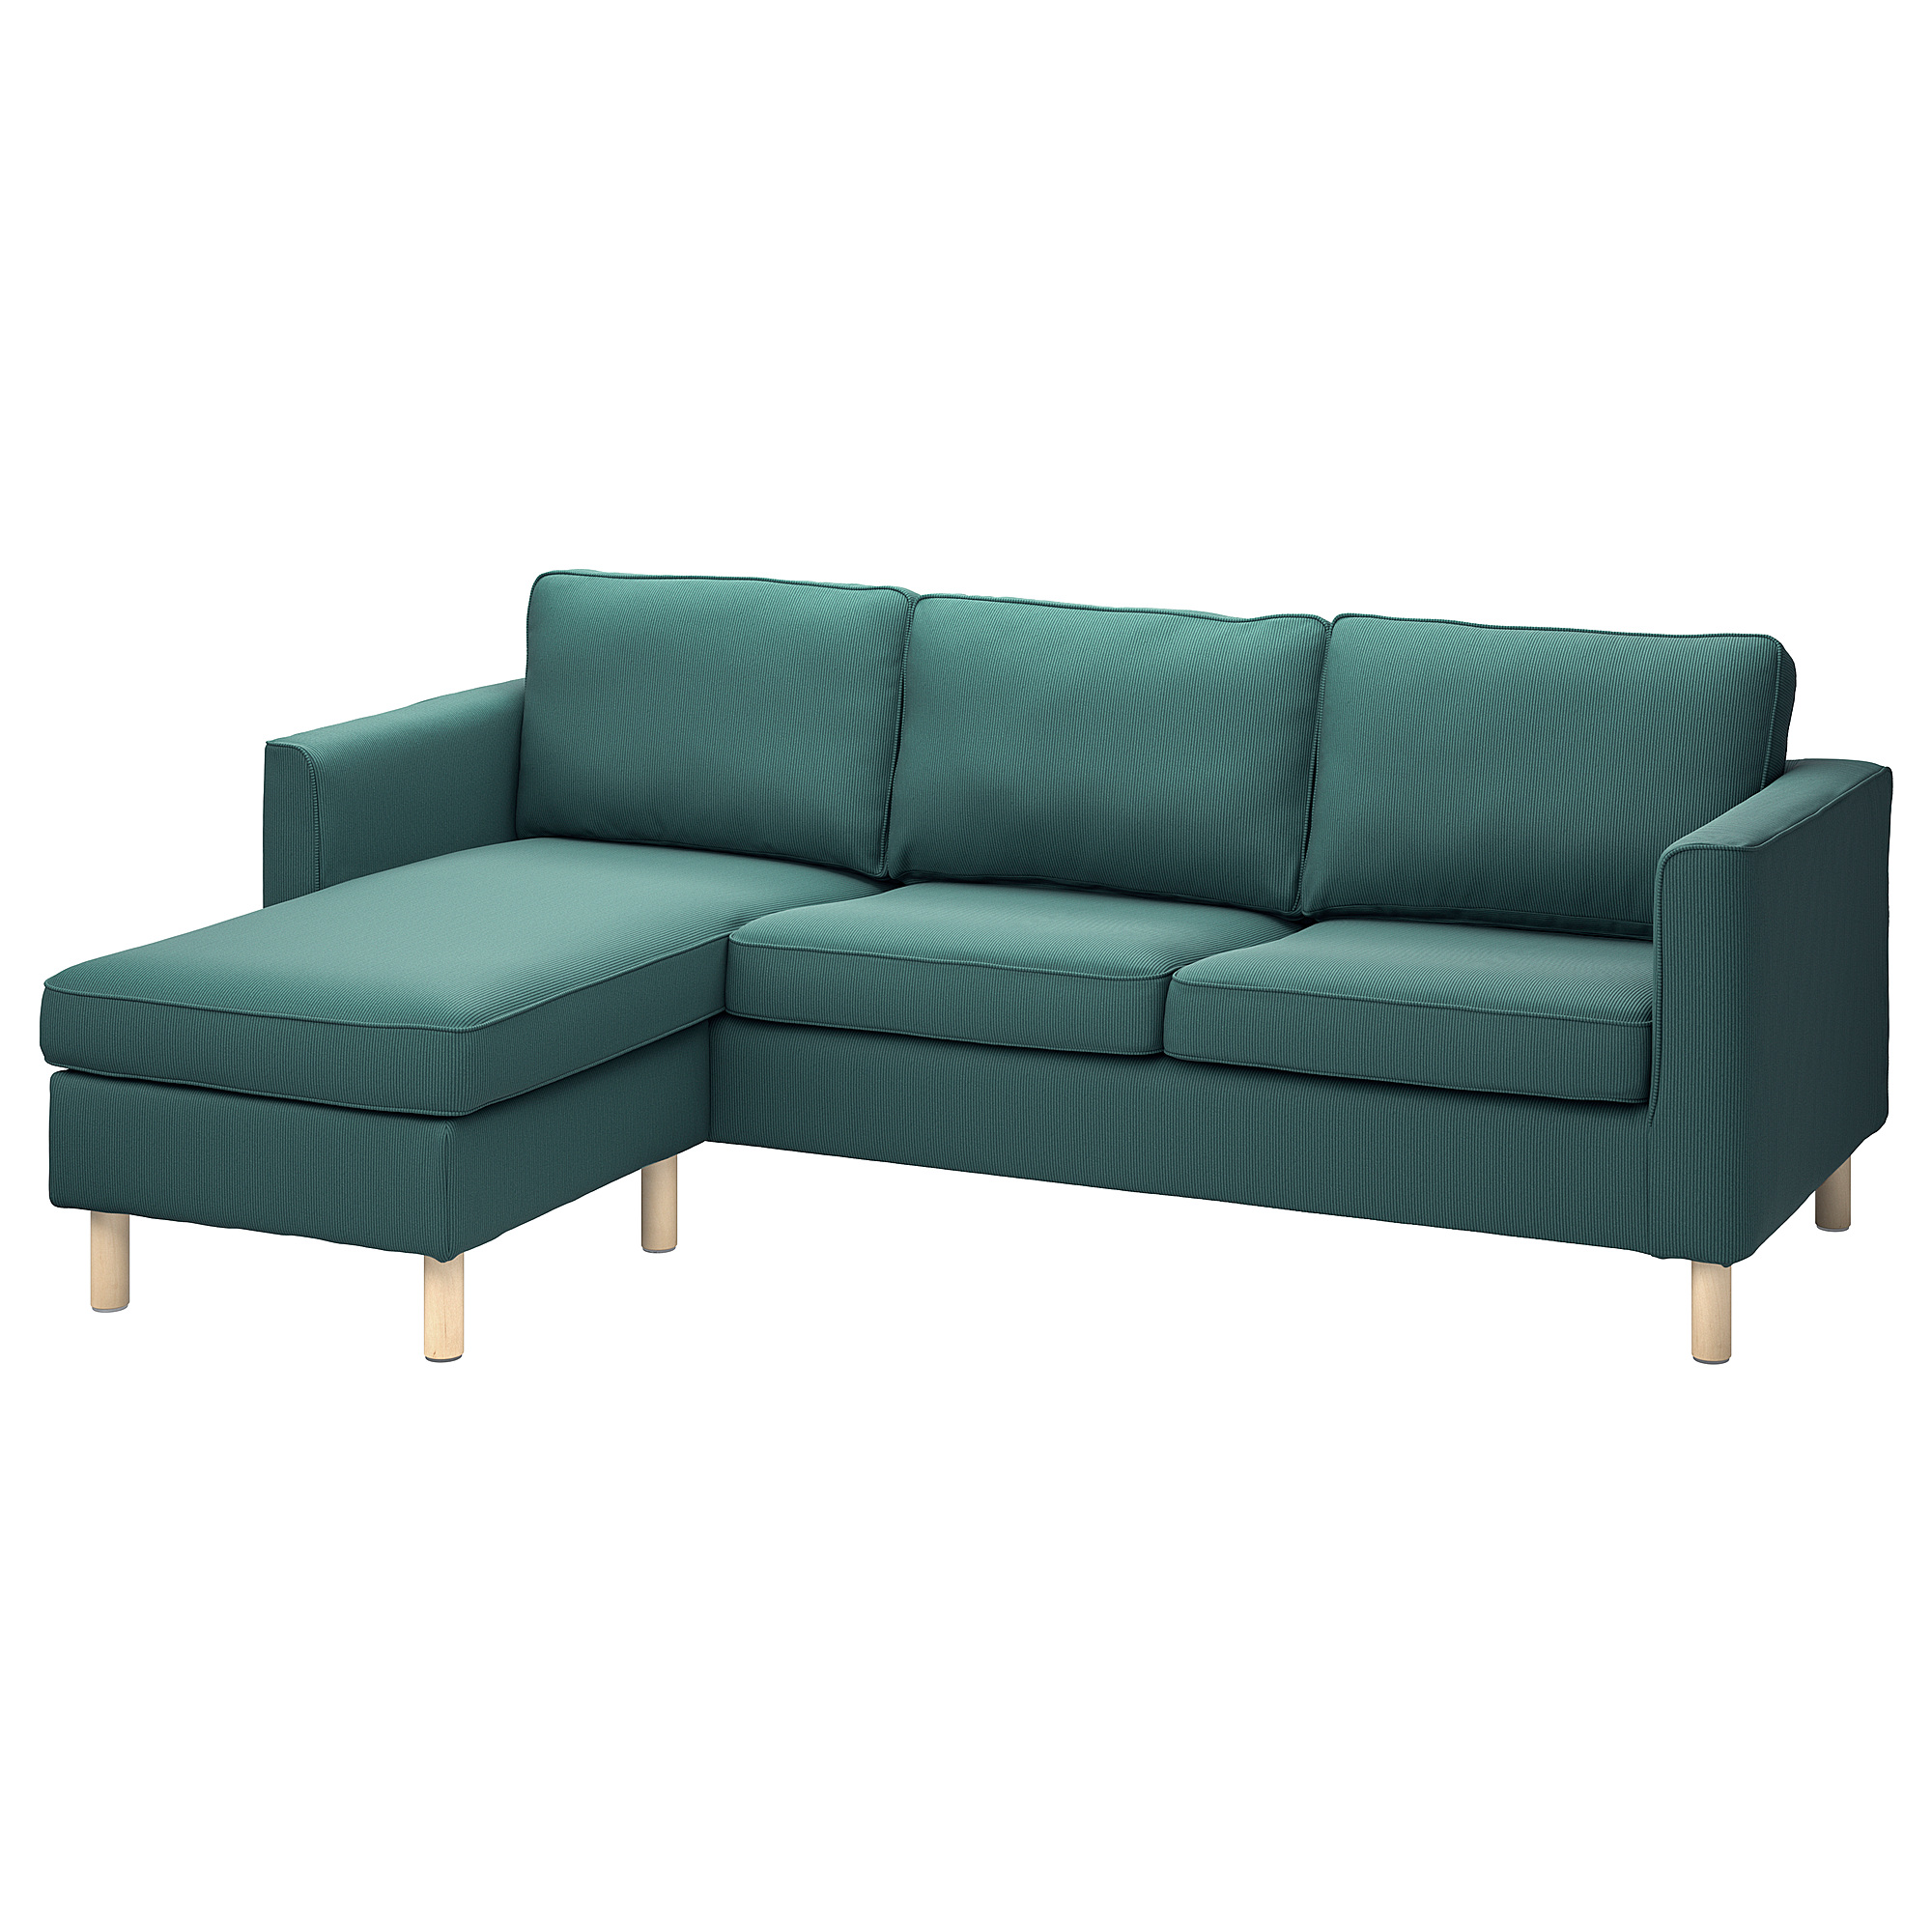 PÄRUP cover for 3-seat sofa